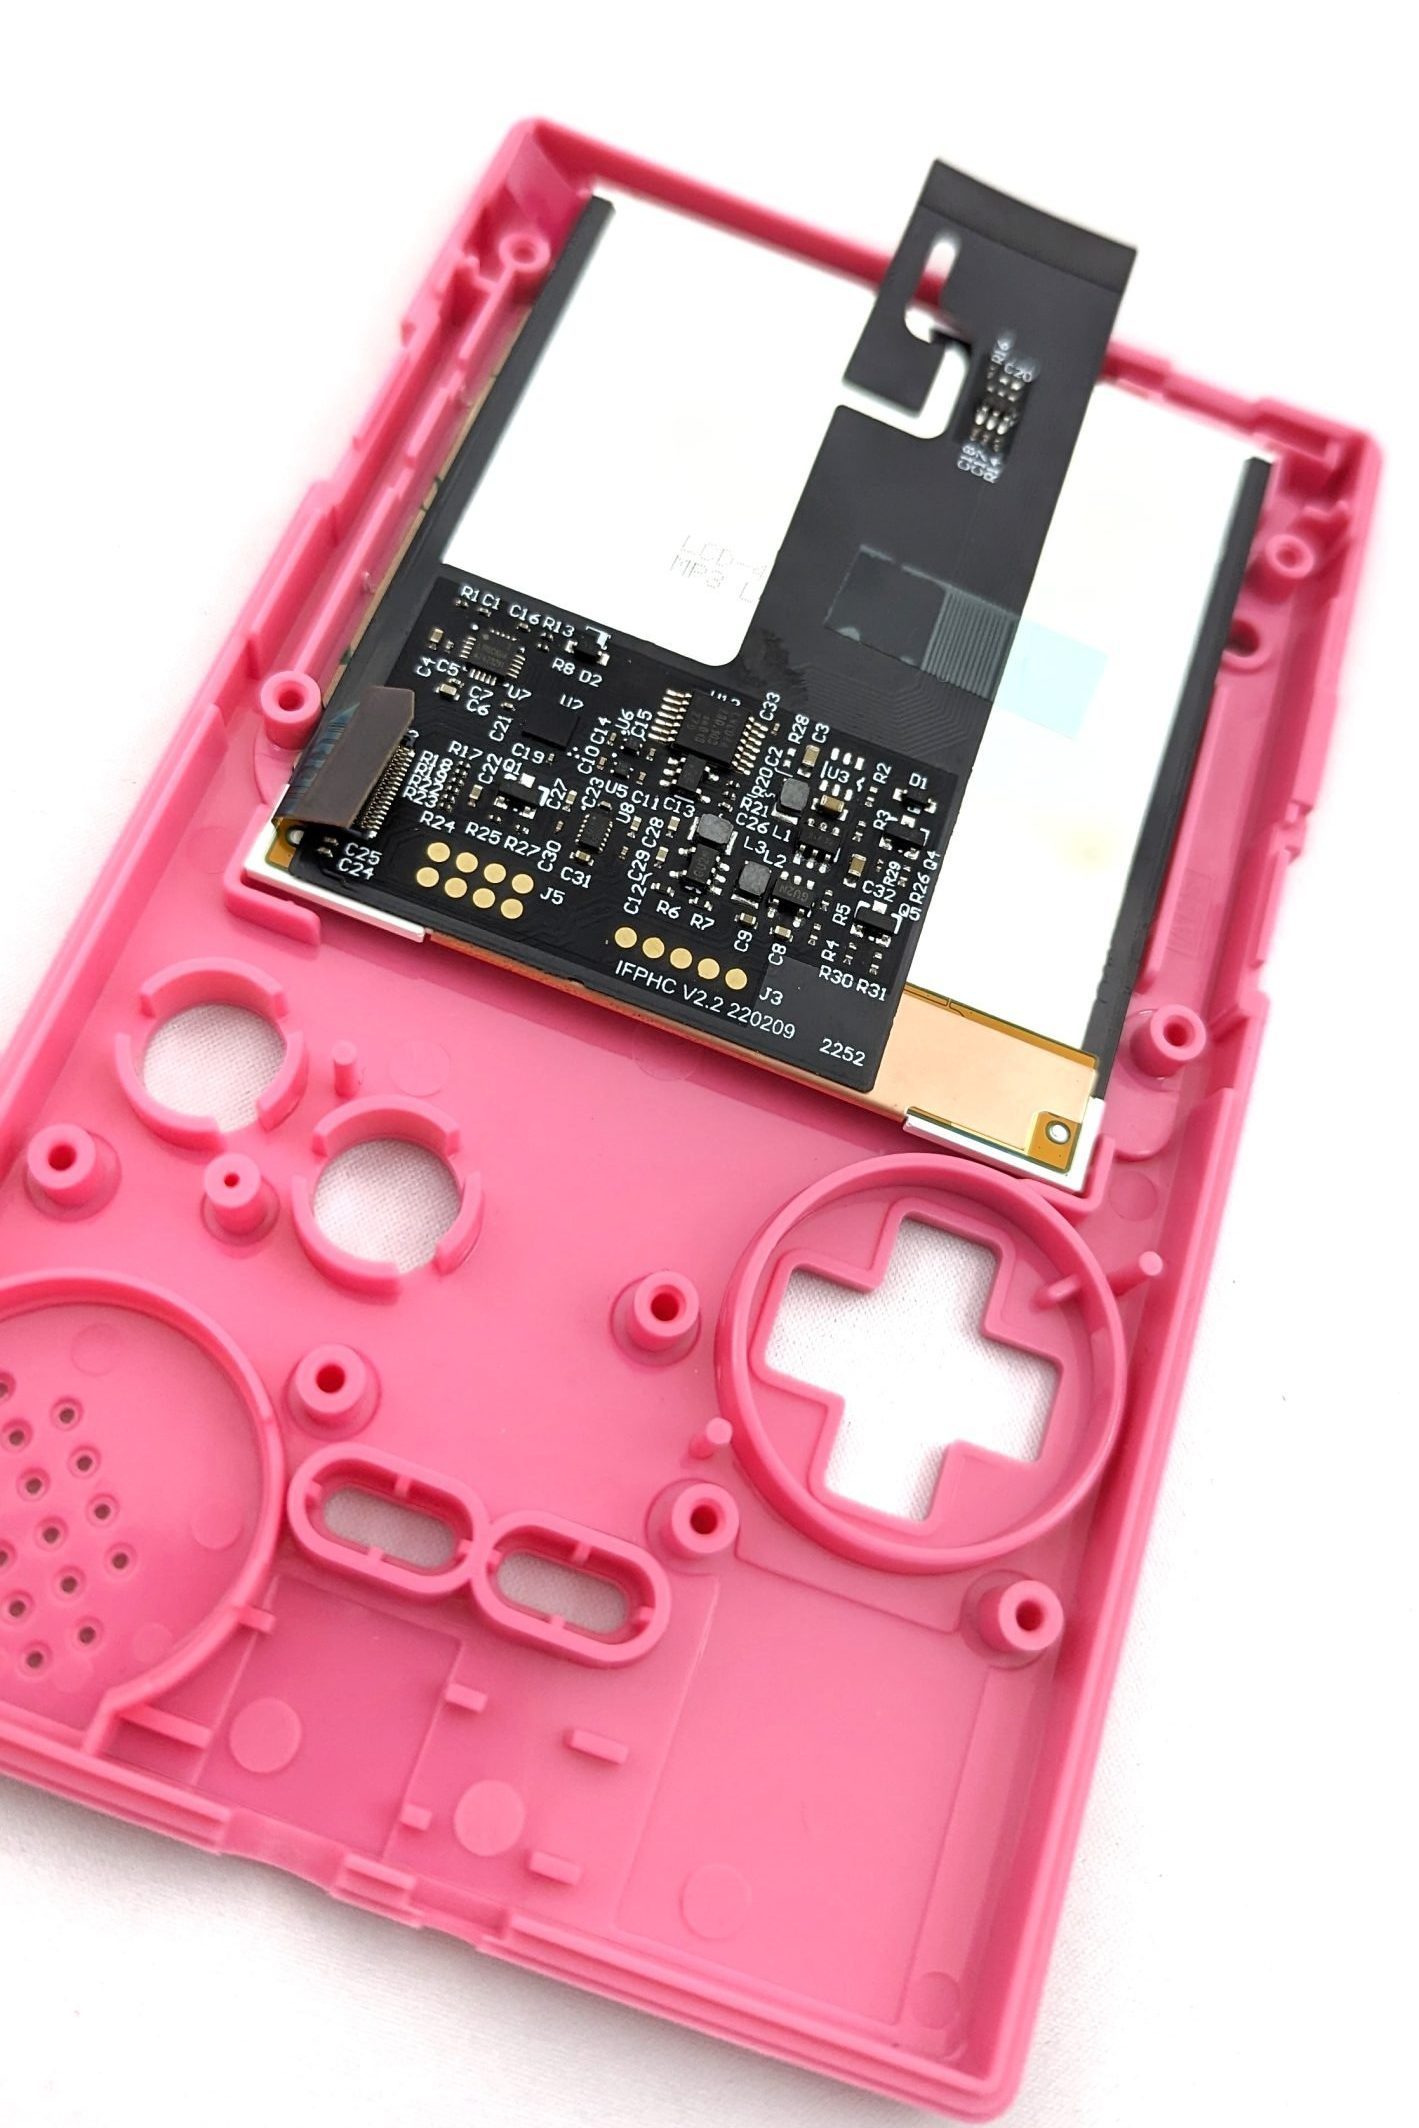 A new screen being inserted into the front of a pink game boy shell